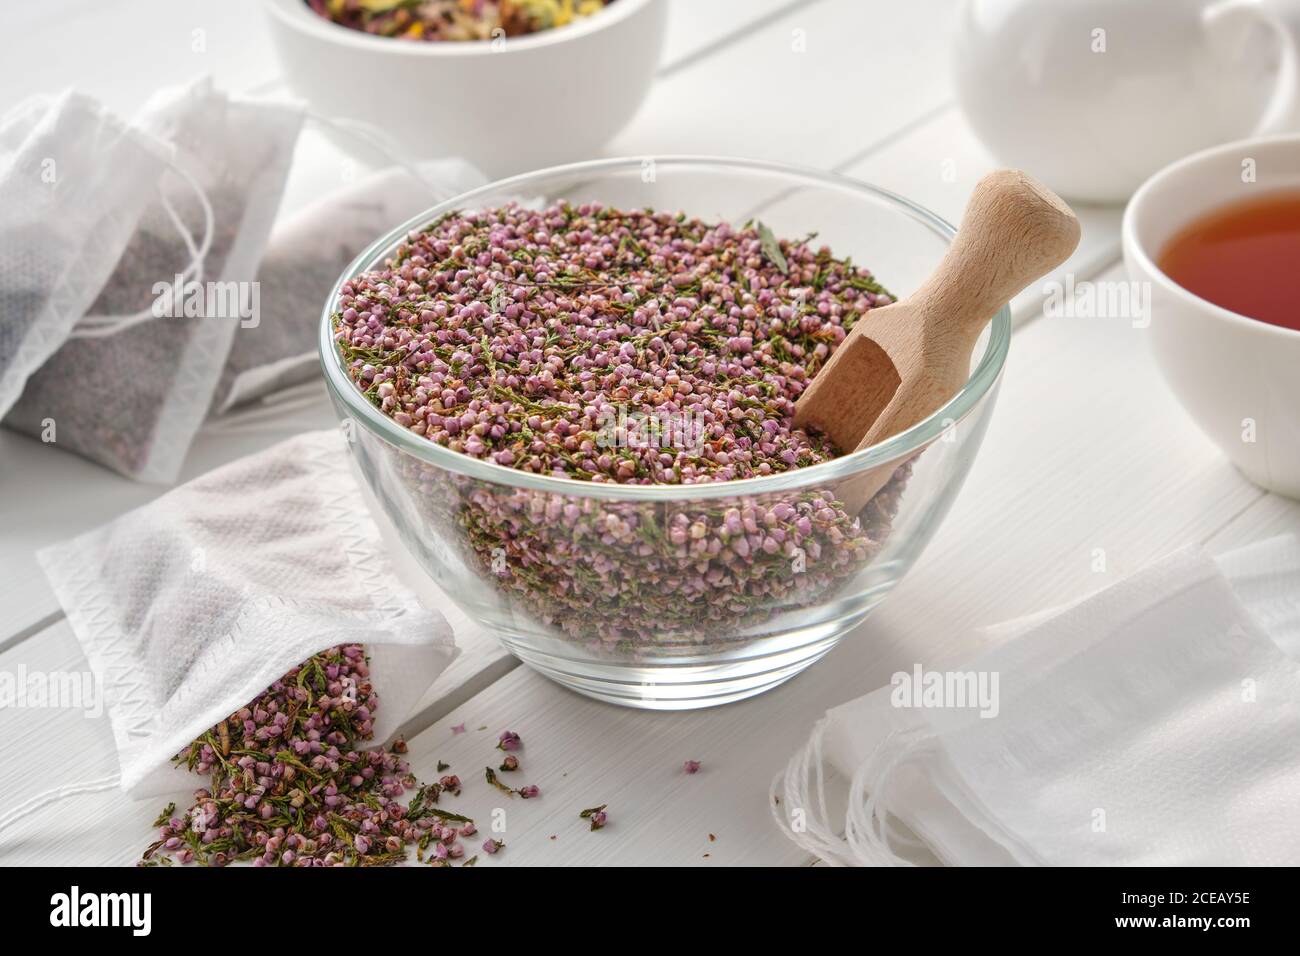 Bowl of dry healthy heather, tea bags with Еrica flowers. Herbal tea cup, teapot and mortar on wooden table. Alternative medicine. Stock Photo